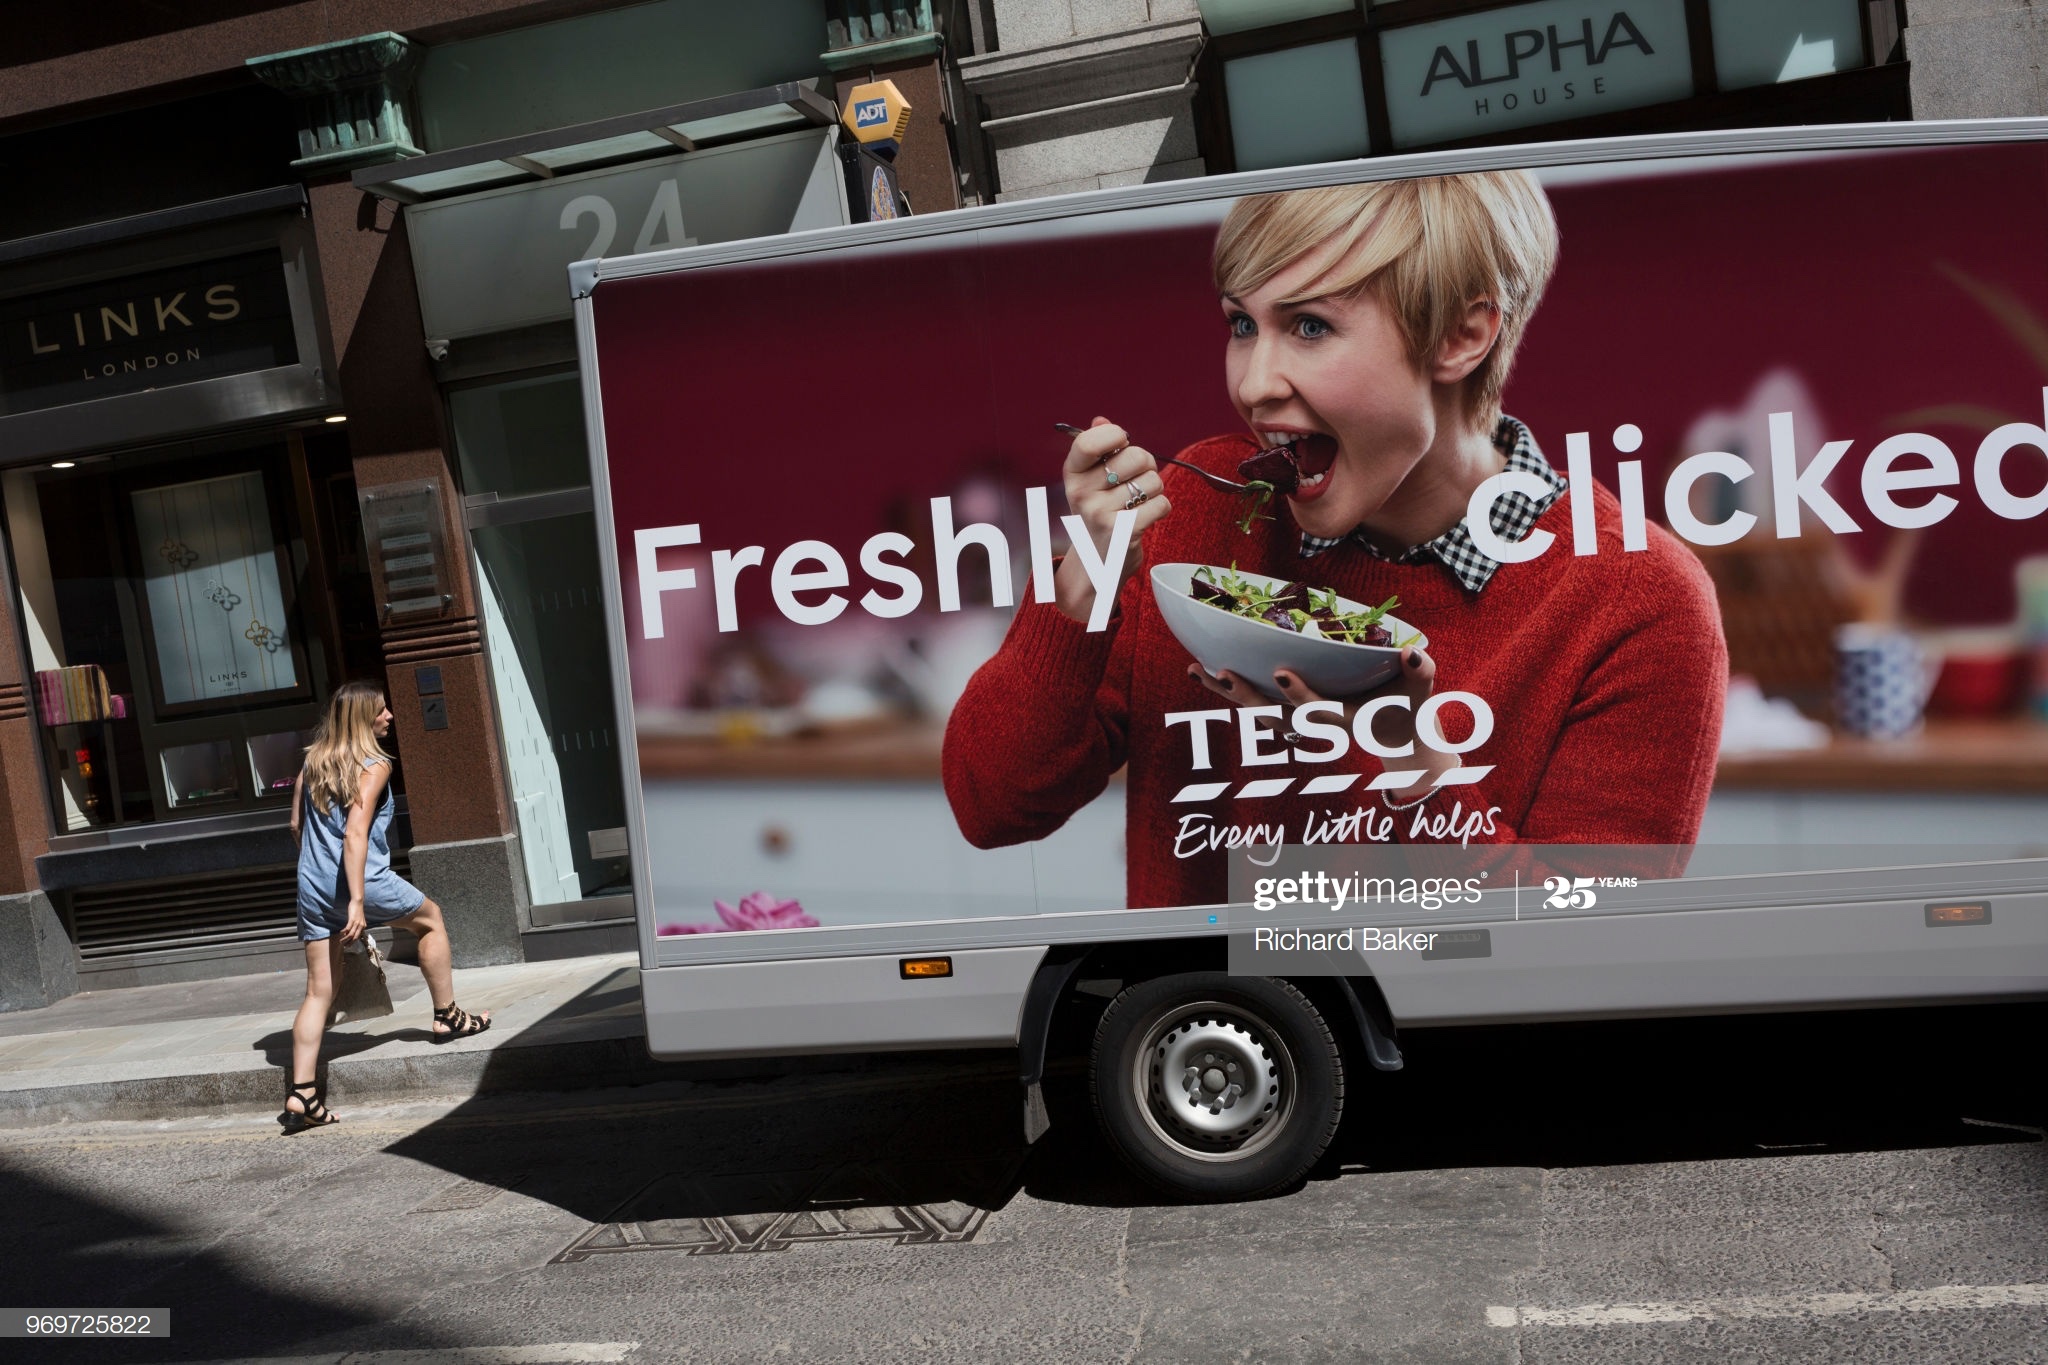 Amy Nickell-Turner on X: Hey Chrissy, I'm the @tesco delivery van beetroot  salad girl. My friends like to send pictures where vandals have graffitied  the 'Freshly Clicked' to say 'Freshly Dicked'. I